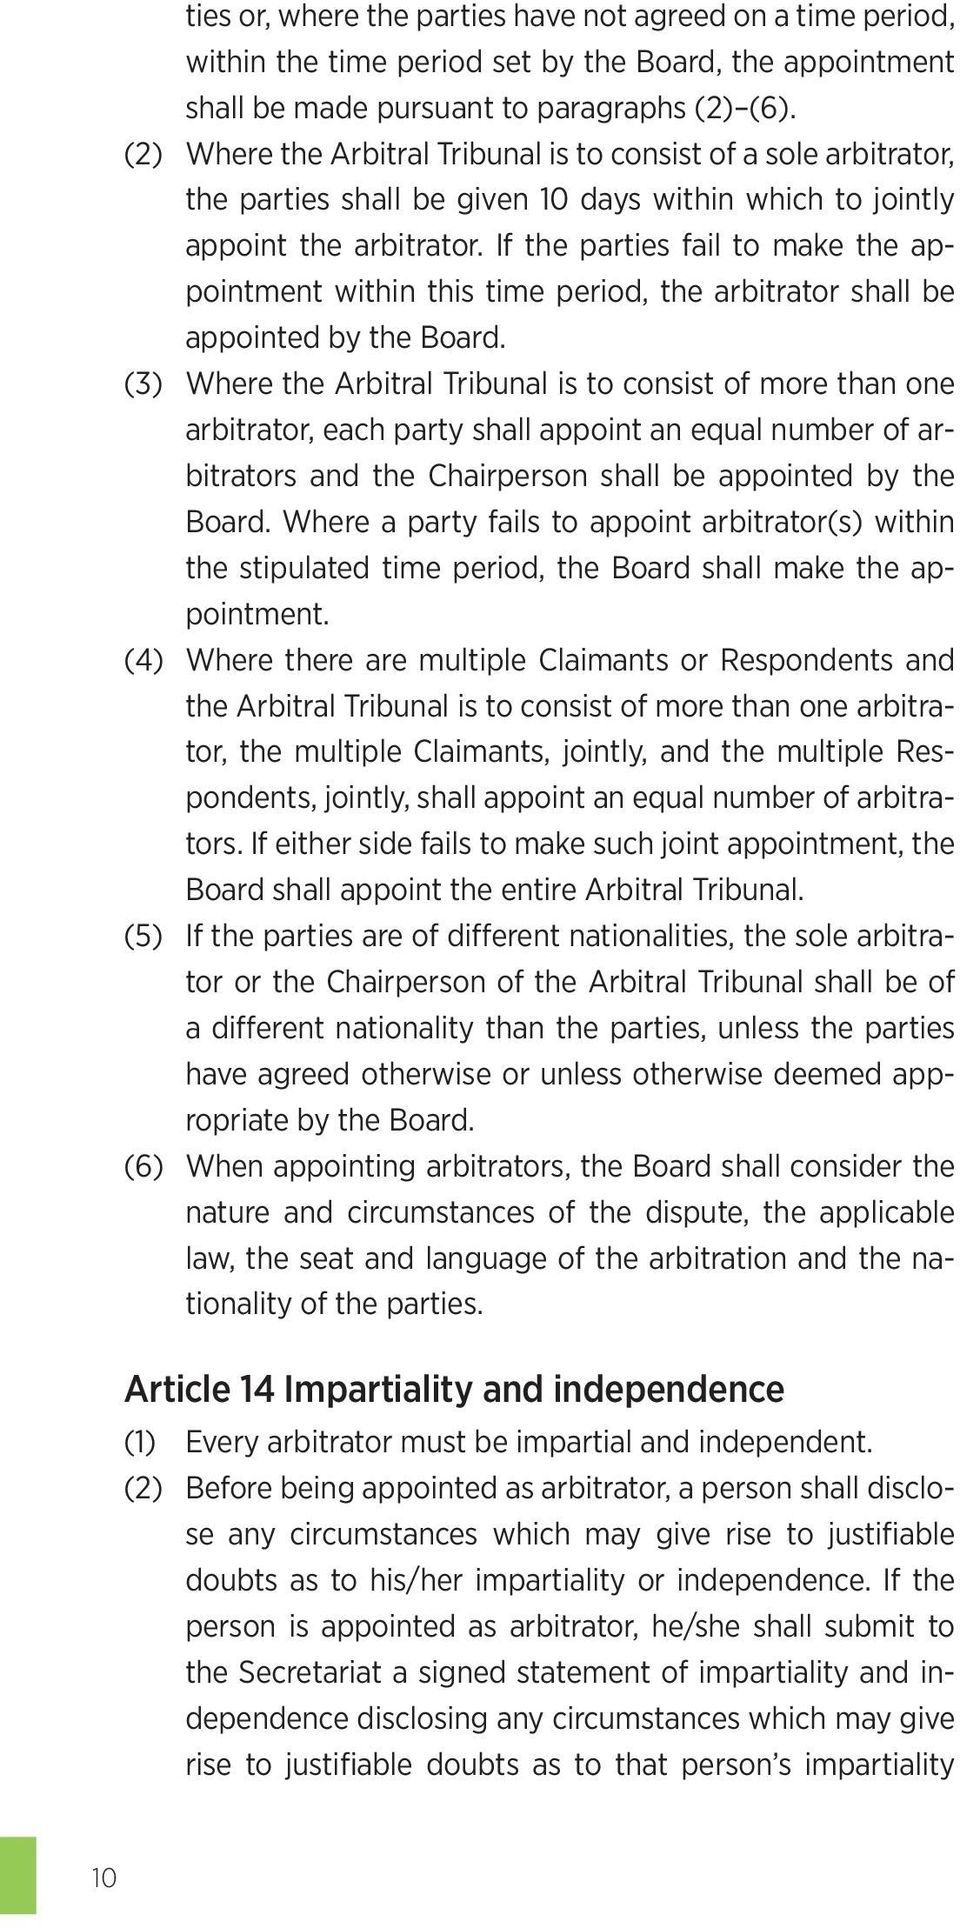 If the parties fail to make the appointment within this time period, the arbitrator shall be appointed by the Board.